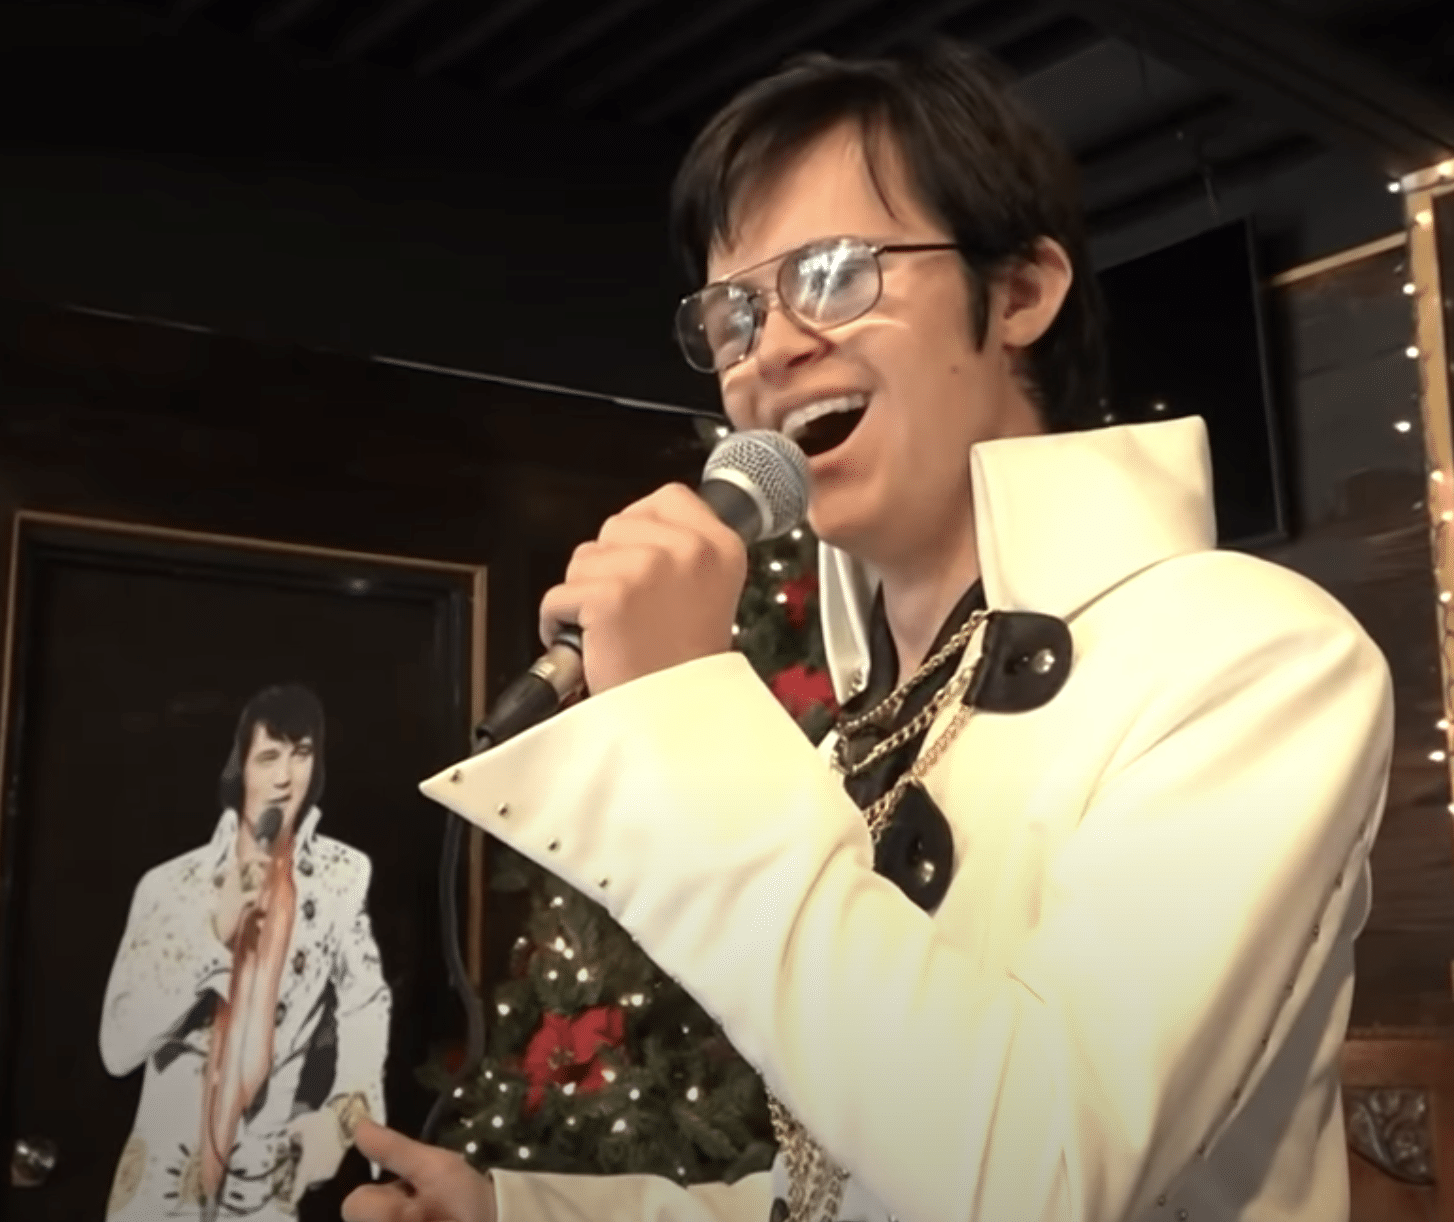 Michigan Teen With Down Syndrome Is A Successful Elvis Tribute Artist